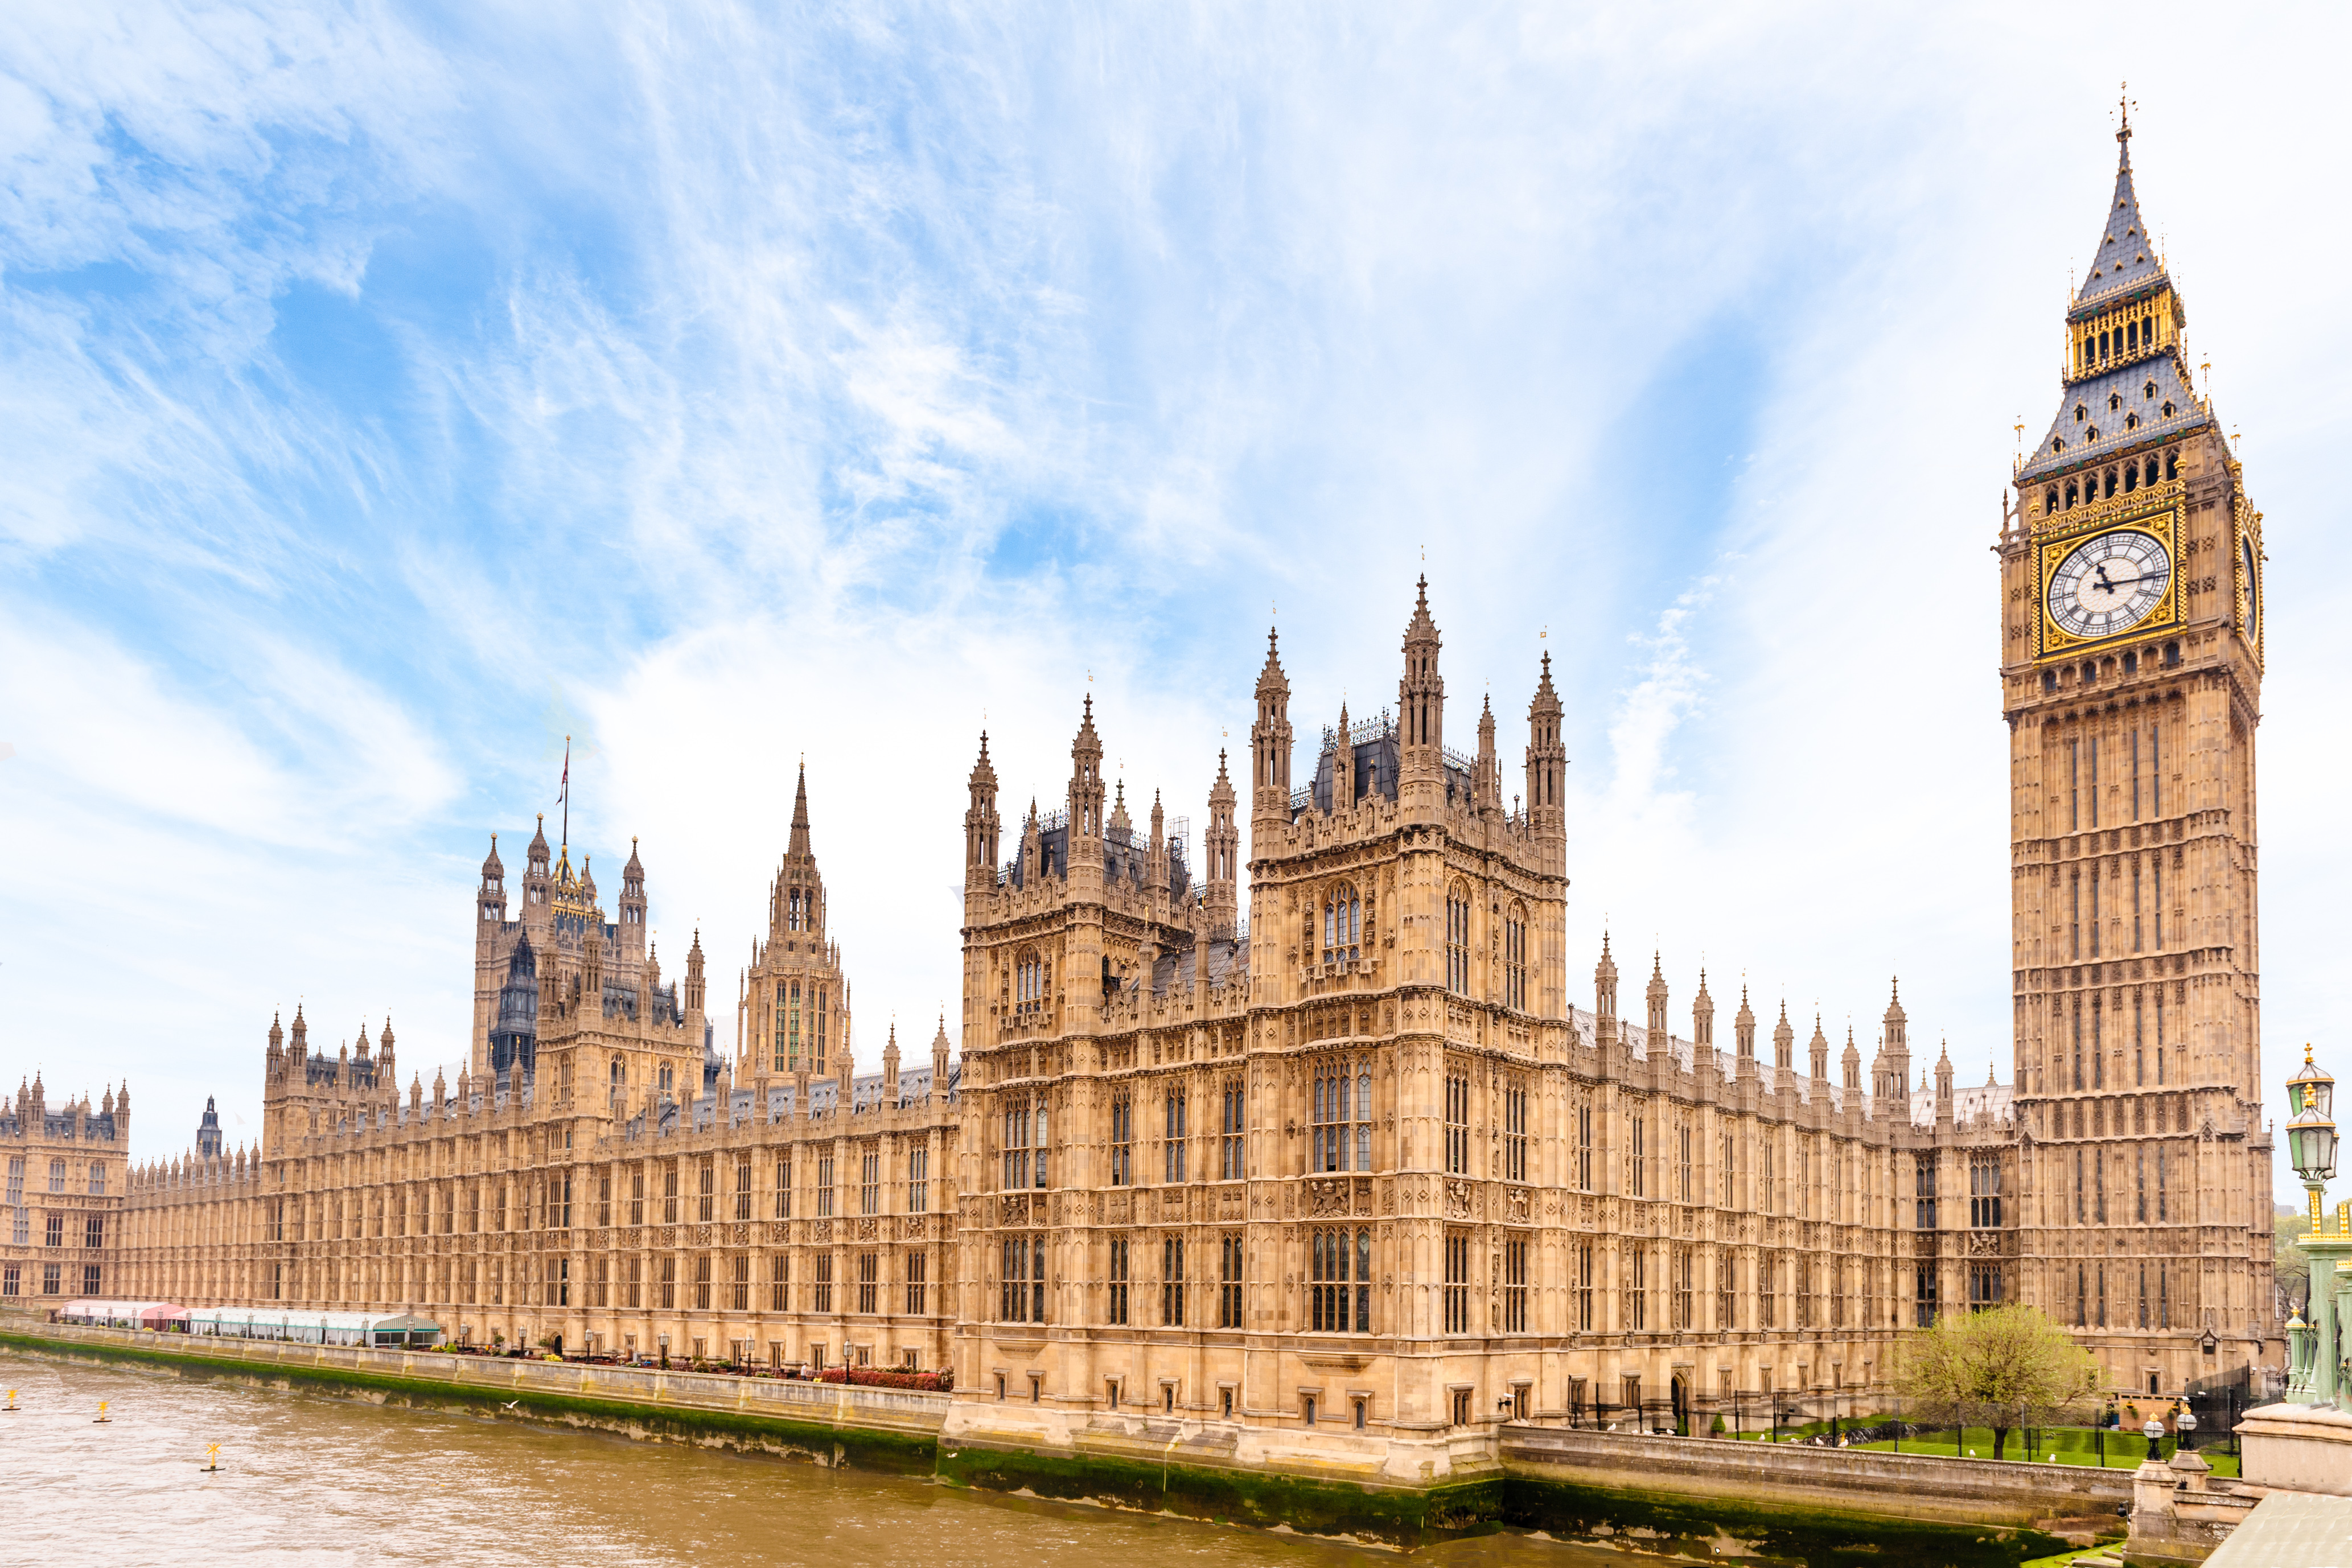 Spring Statement – RHA calls for Government support to boost economy